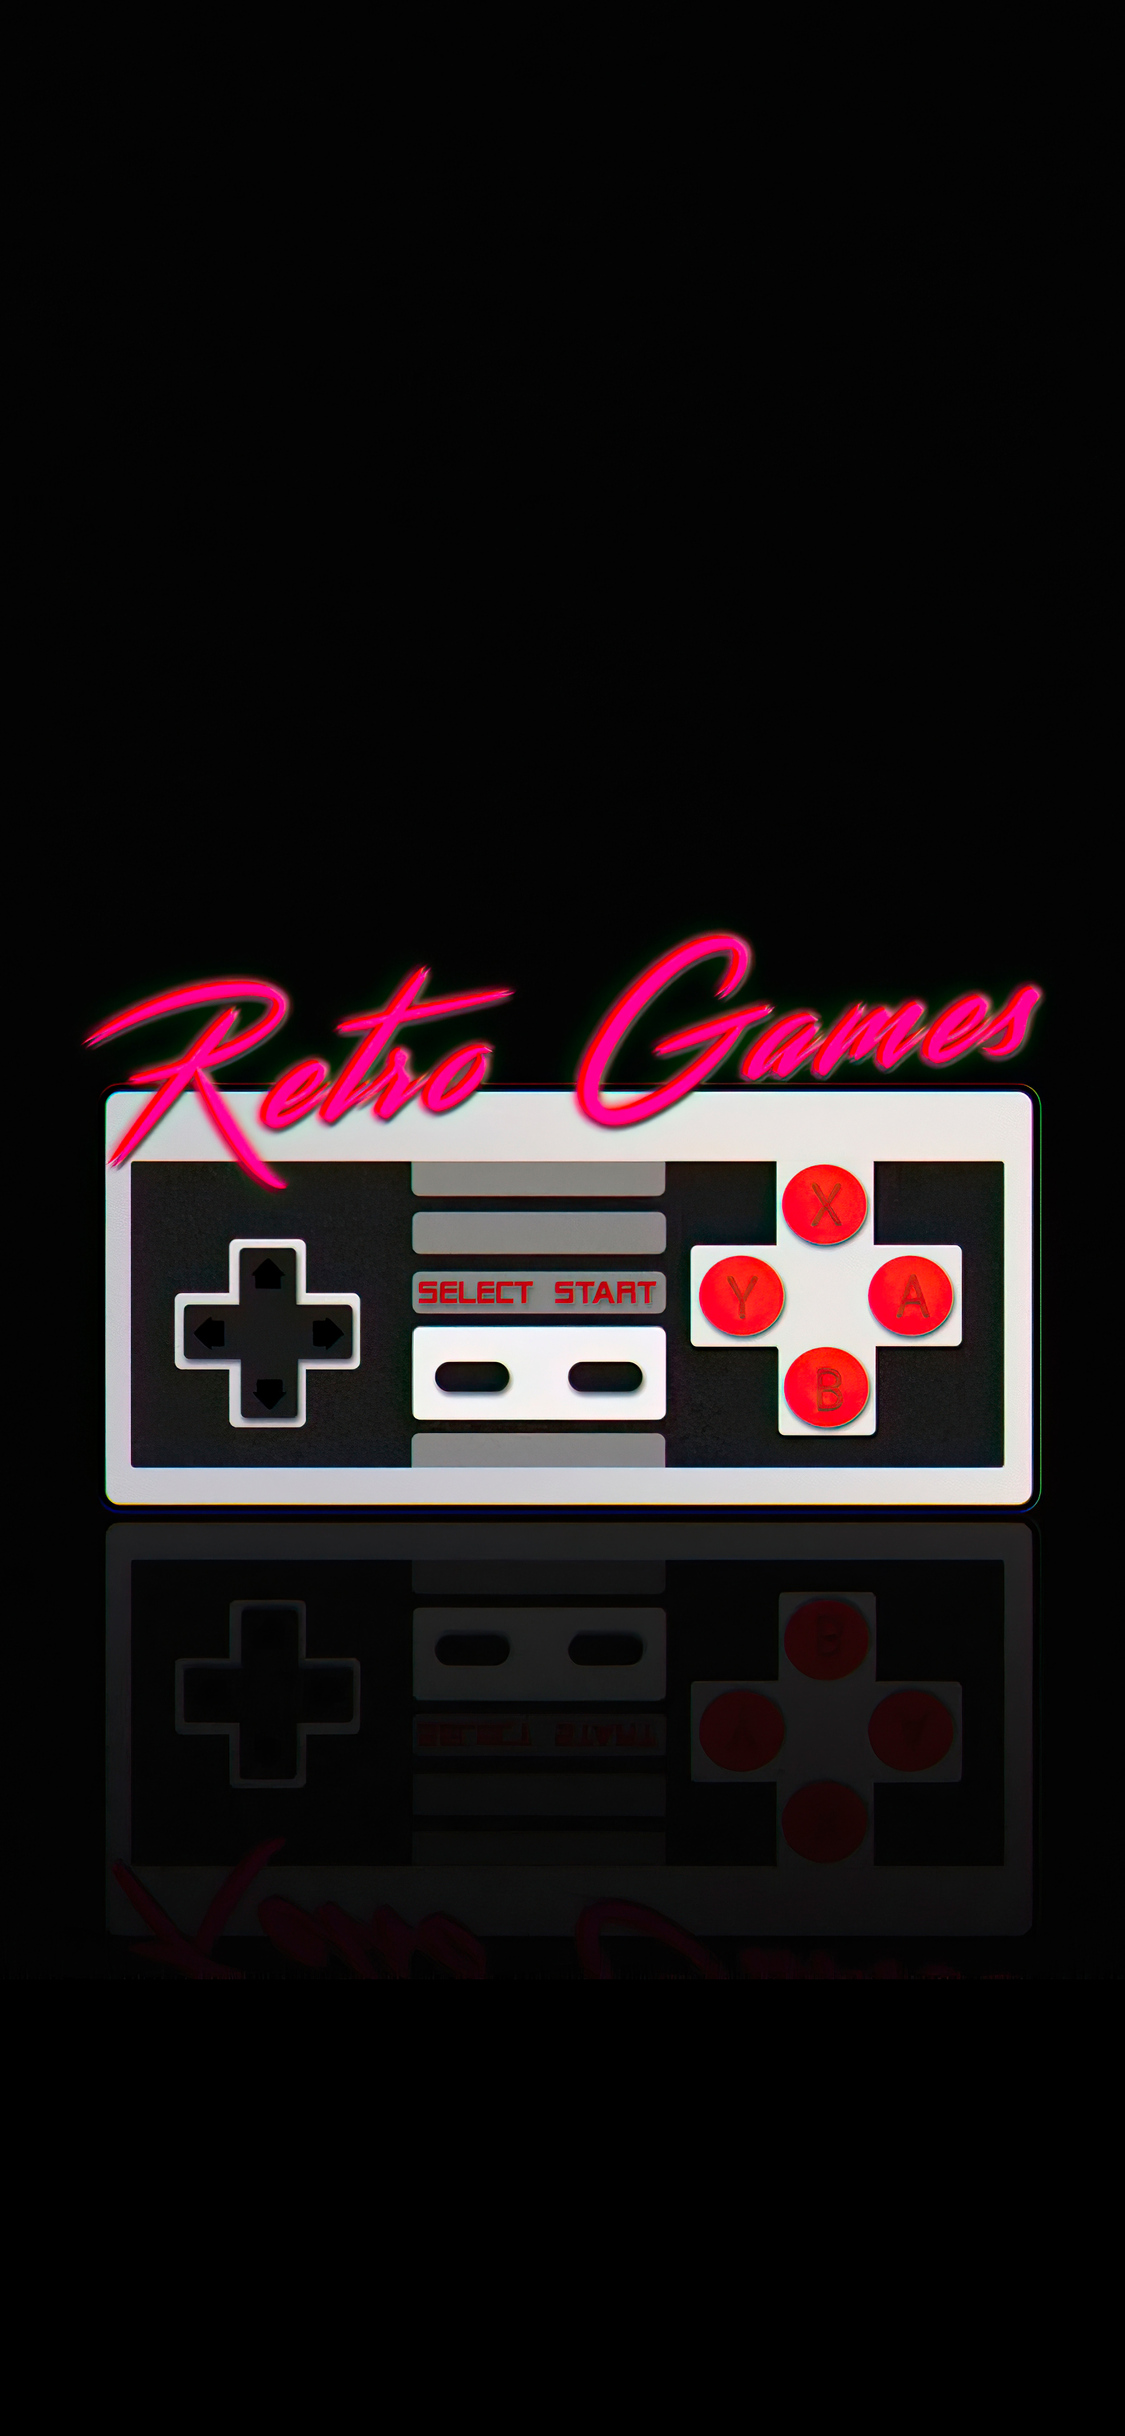 Retro games Wallpaper for iPhone 11 Pro Max X 8 7 6  Free Download on  3Wallpapers